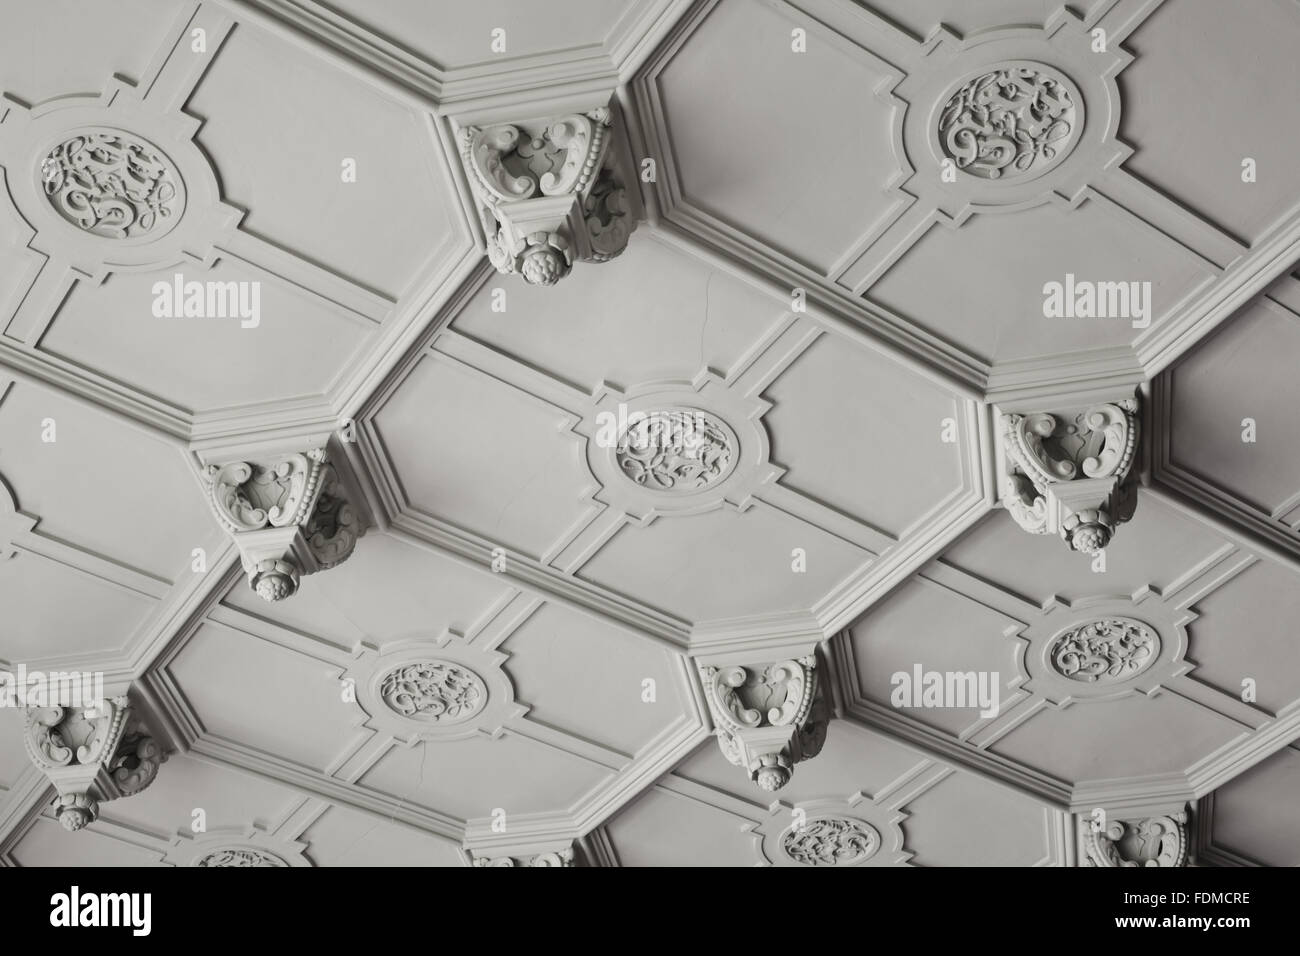 Detail of part of the plaster ceiling in the Dining Room at Gawthorpe Hall, Lancashire. The ceiling was remade by Sir Charles Barry in 1852 in an enriched form from the original design of 1605. Stock Photo